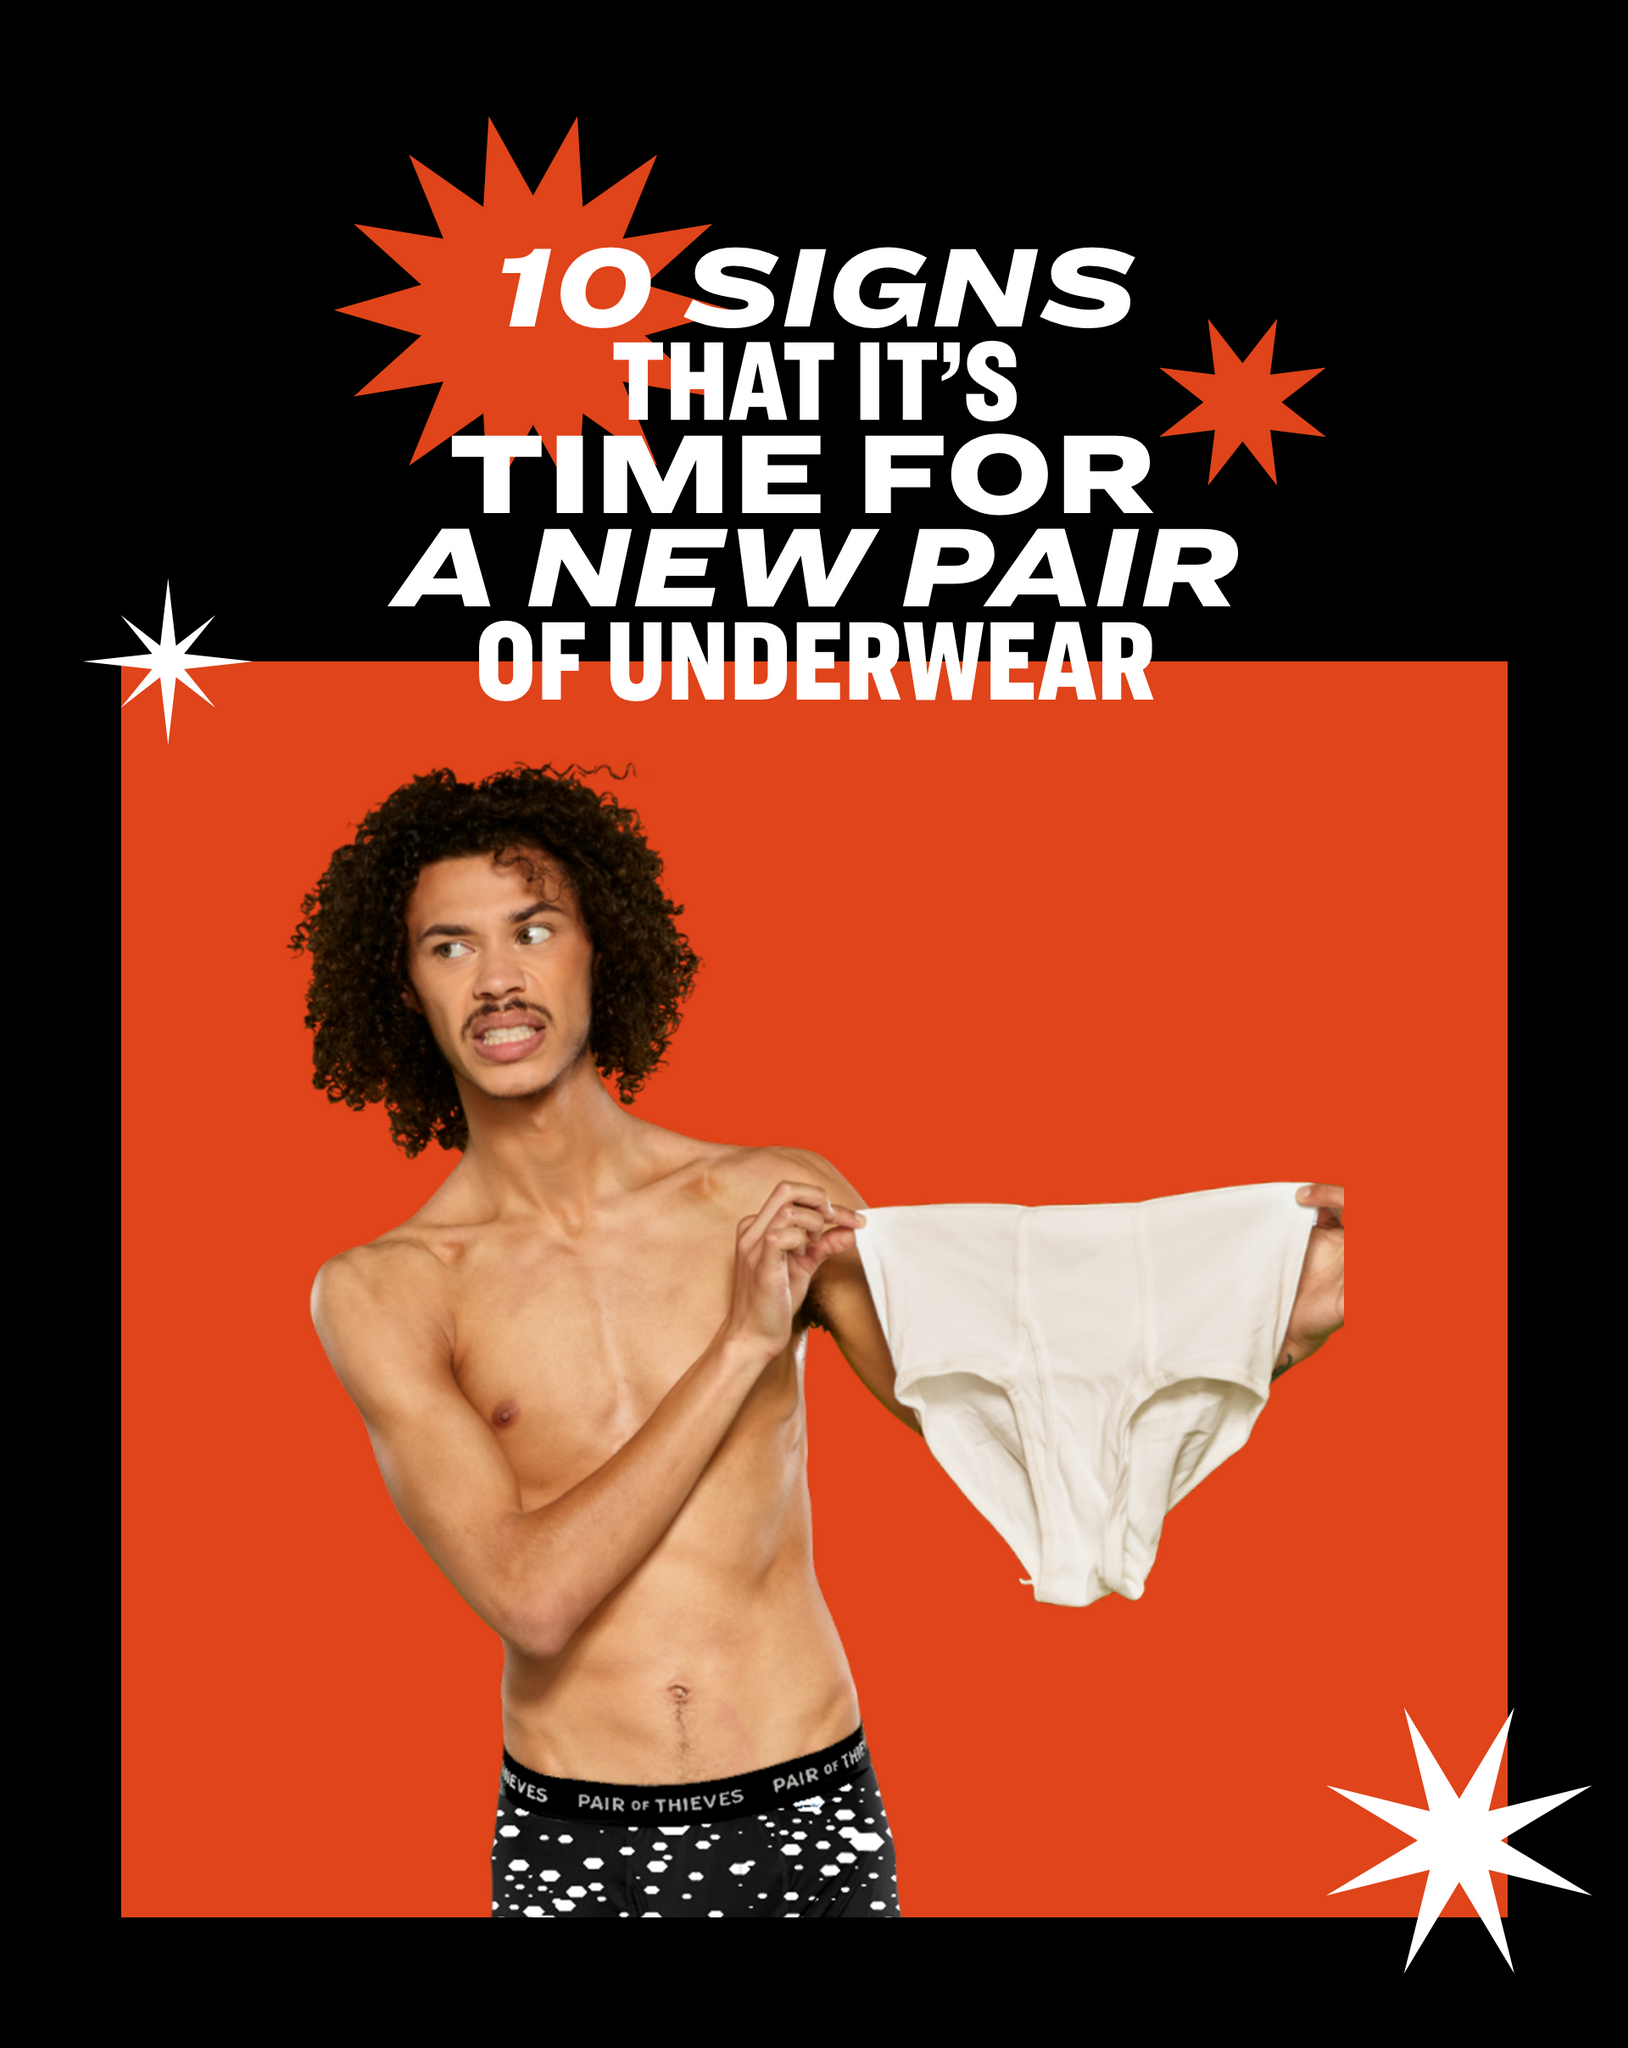 10 Signs That It's time for a New Pair of Underwear – Pair of Thieves